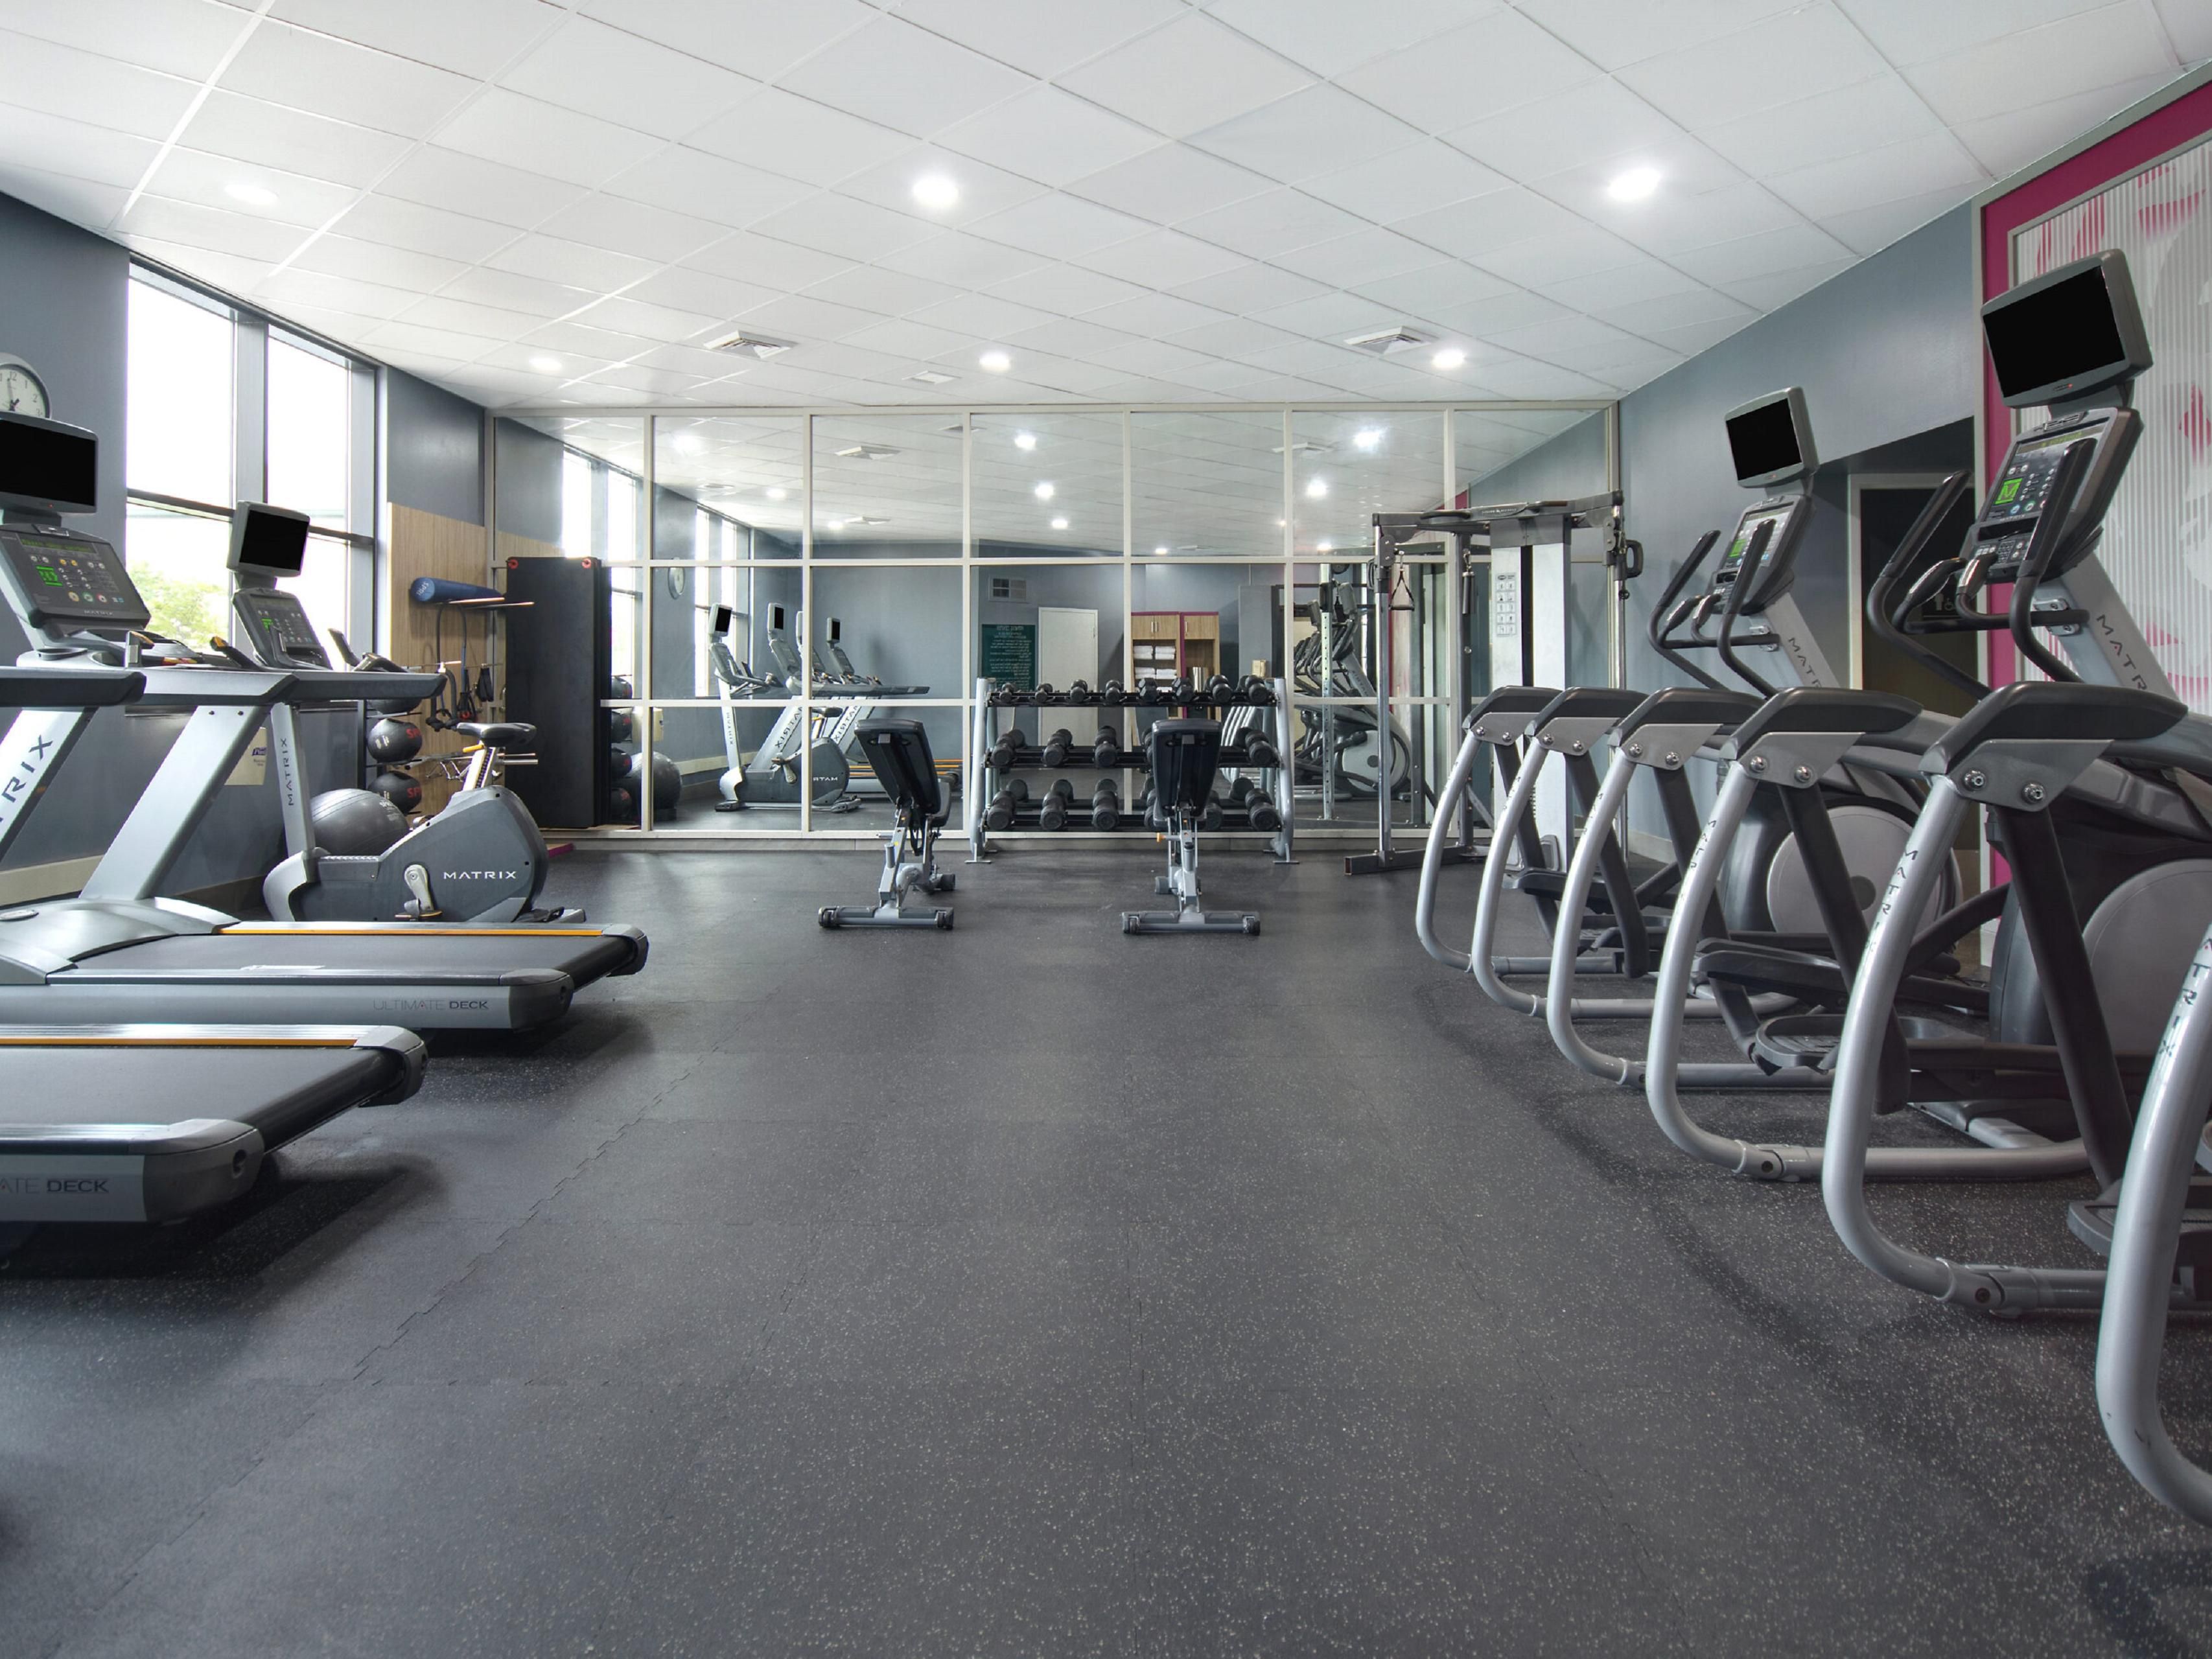 Get energized in our hotel’s state-of-the-art fitness center with 16 stations for cardio and weight training. Keep up your workout routine with modern fitness equipment, including stair steppers, treadmills, elliptical machines, and stationary bicycles.  The fitness center is open 24/7.